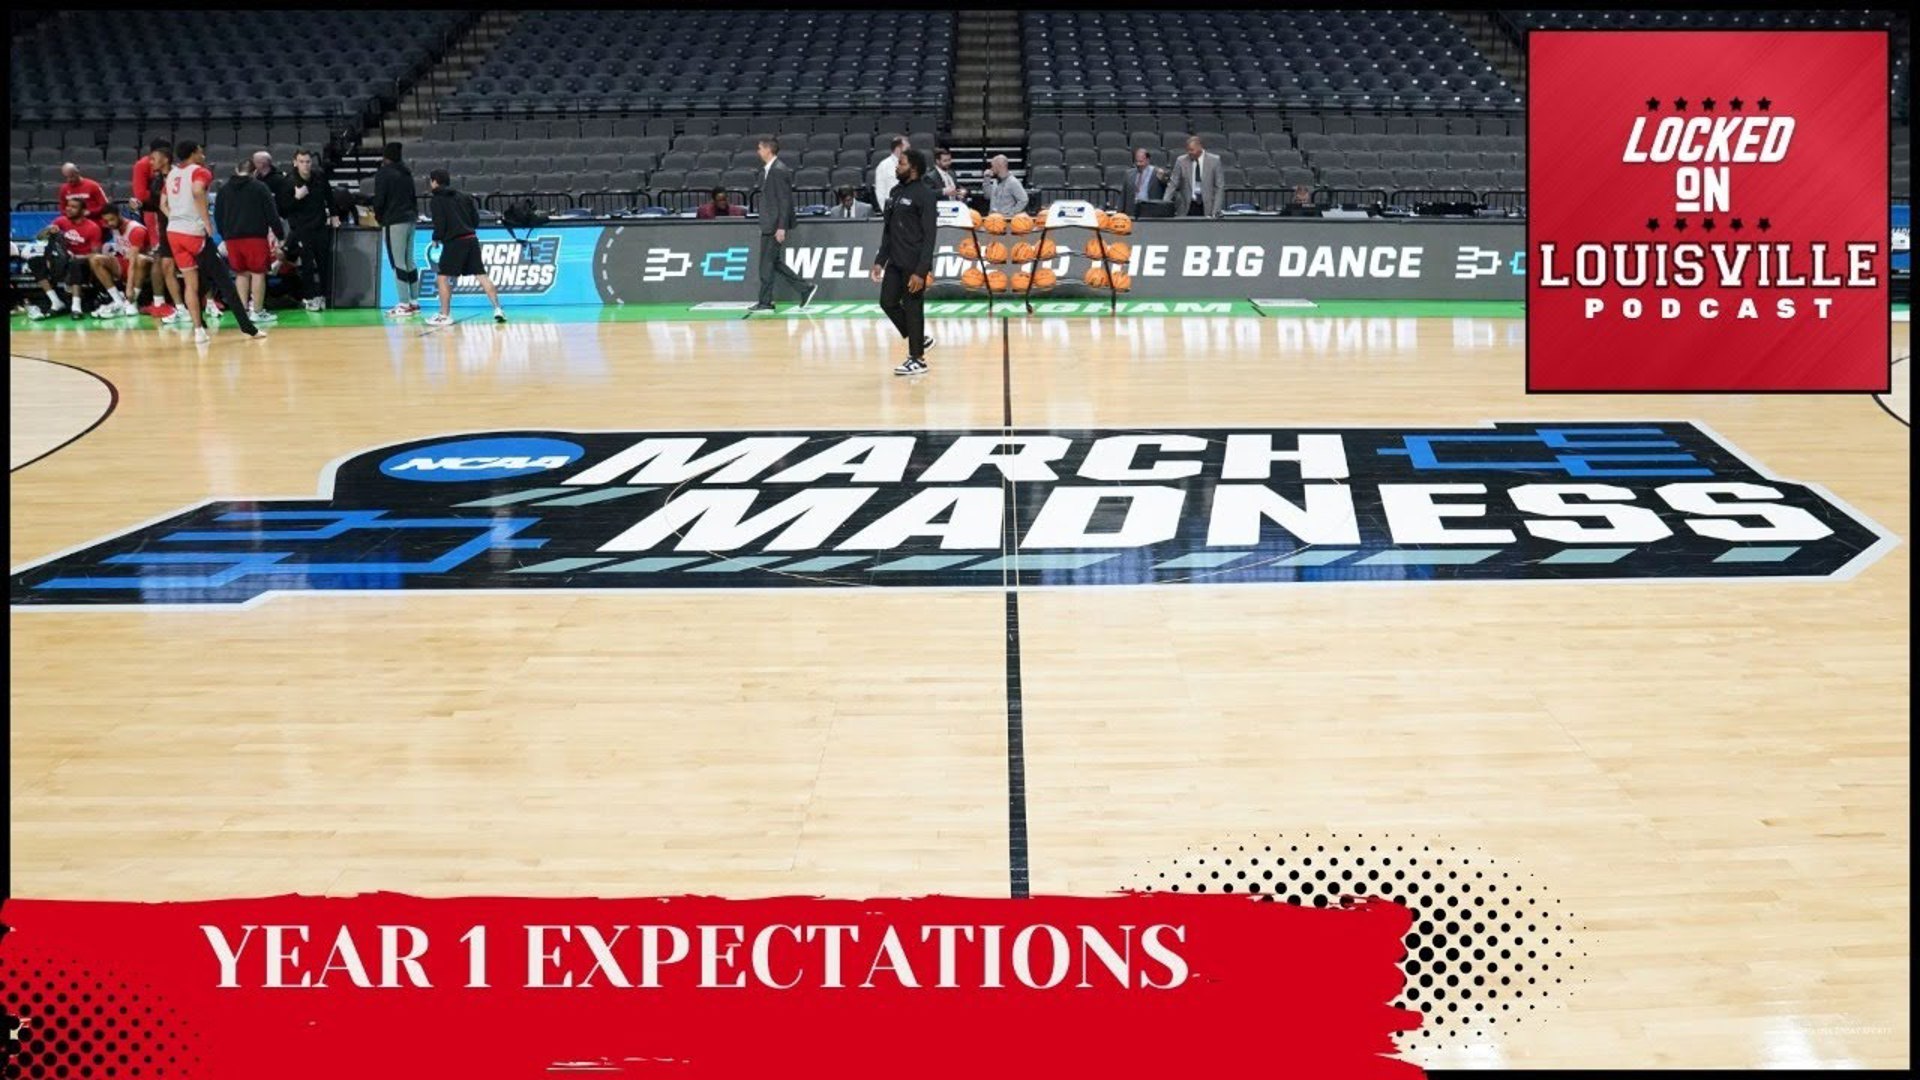 Even with a new coach, the expectations of making the NCAA Tournament remain the same for Louisville